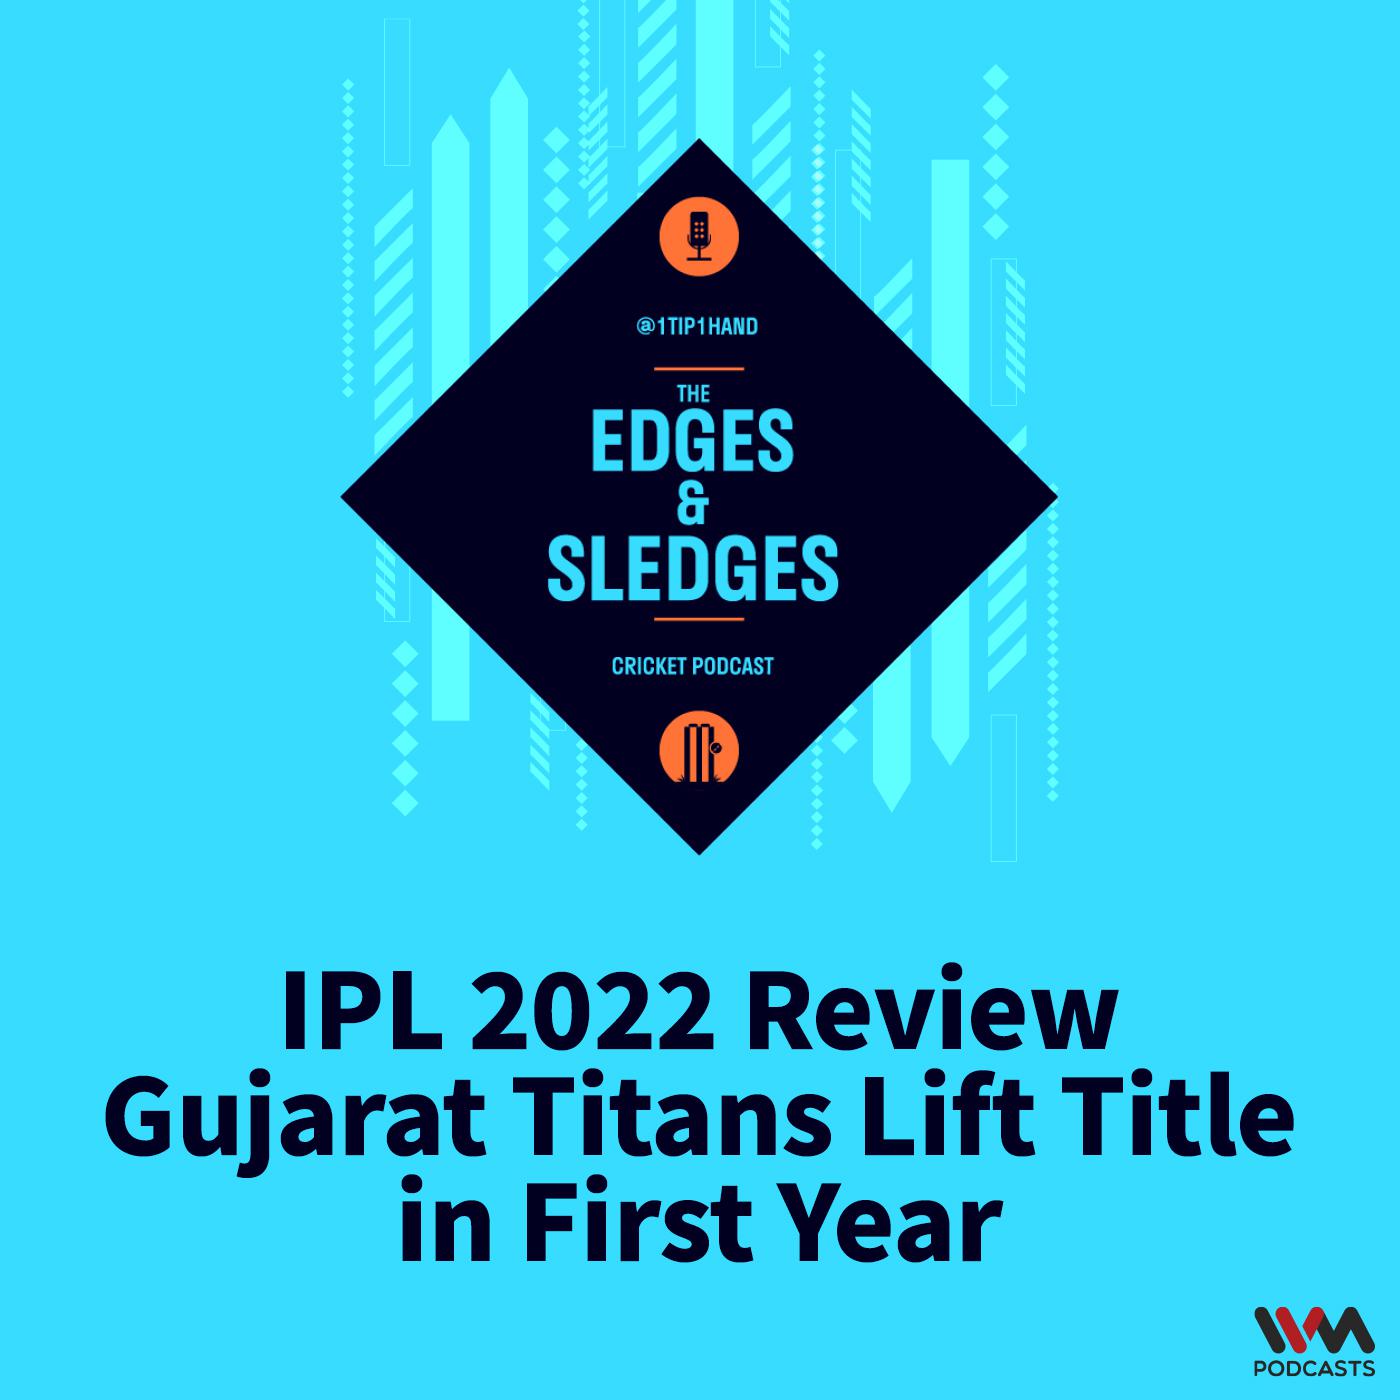 IPL 2022 Review: Gujarat Titans Lift Title in First Year